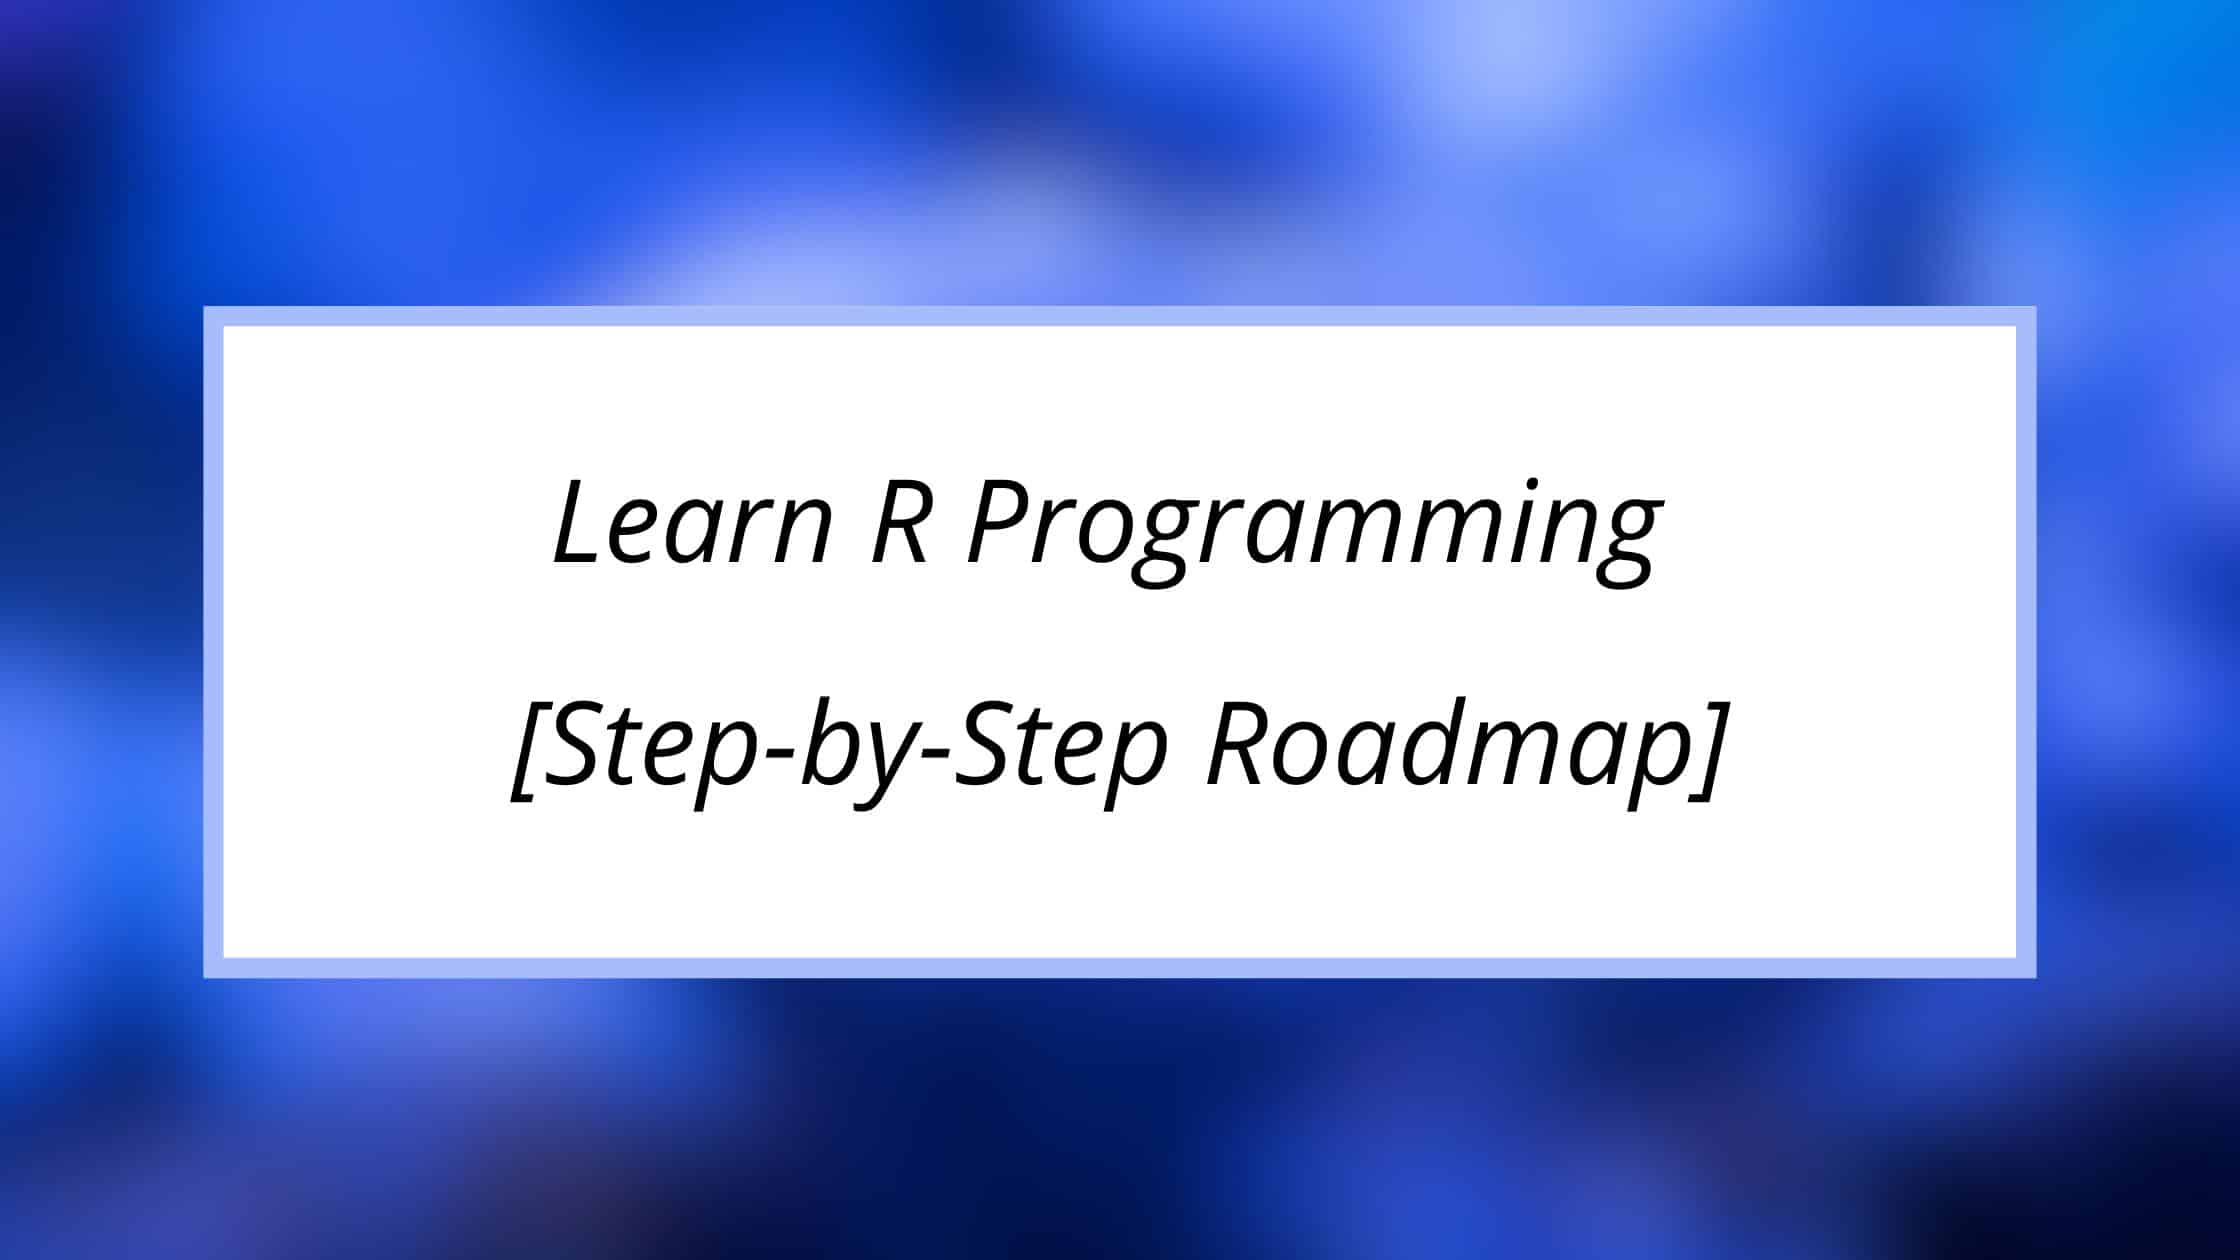 3 Setting up R and RStudio  R for Non-Programmers: A Guide for Social  Scientists